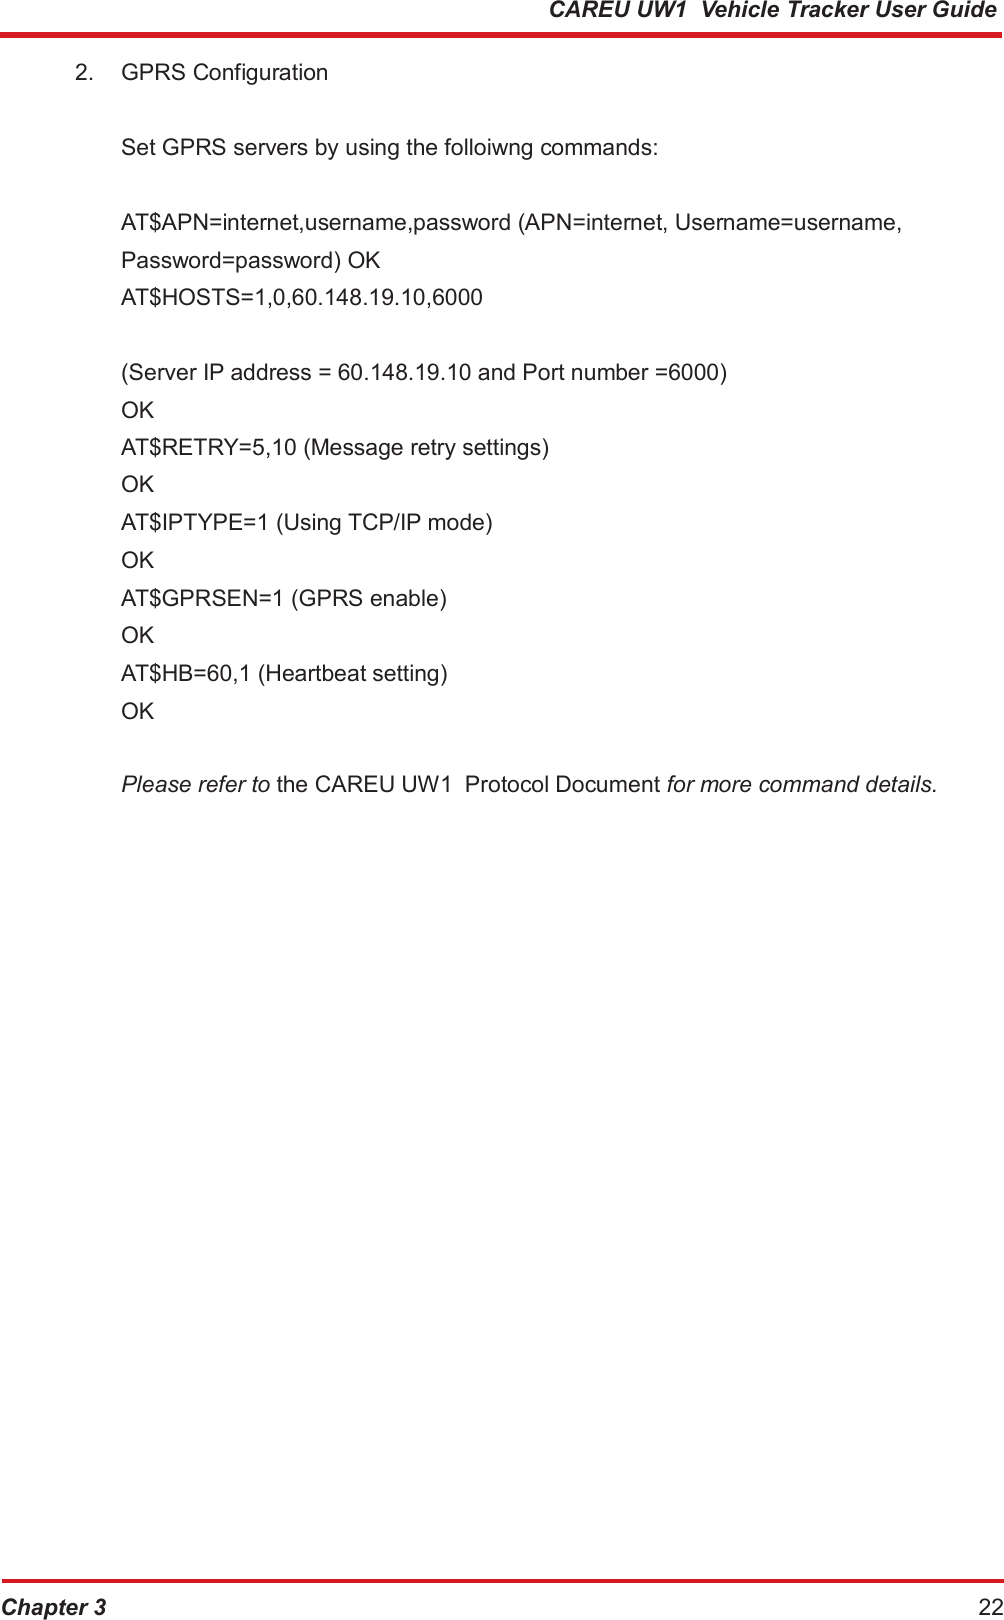 CAREU UW1  Vehicle Tracker User Guide 2. GPRS Configuration Set GPRS servers by using the folloiwng commands: AT$APN=internet,username,password (APN=internet, Username=username, Password=password) OK AT$HOSTS=1,0,60.148.19.10,6000 (Server IP address = 60.148.19.10 and Port number =6000)  OK  AT$RETRY=5,10 (Message retry settings) OK AT$IPTYPE=1 (Using TCP/IP mode) OK AT$GPRSEN=1 (GPRS enable) OK AT$HB=60,1 (Heartbeat setting)  OK Please refer to the CAREU UW1  Protocol Document for more command details. Chapter 3 22 